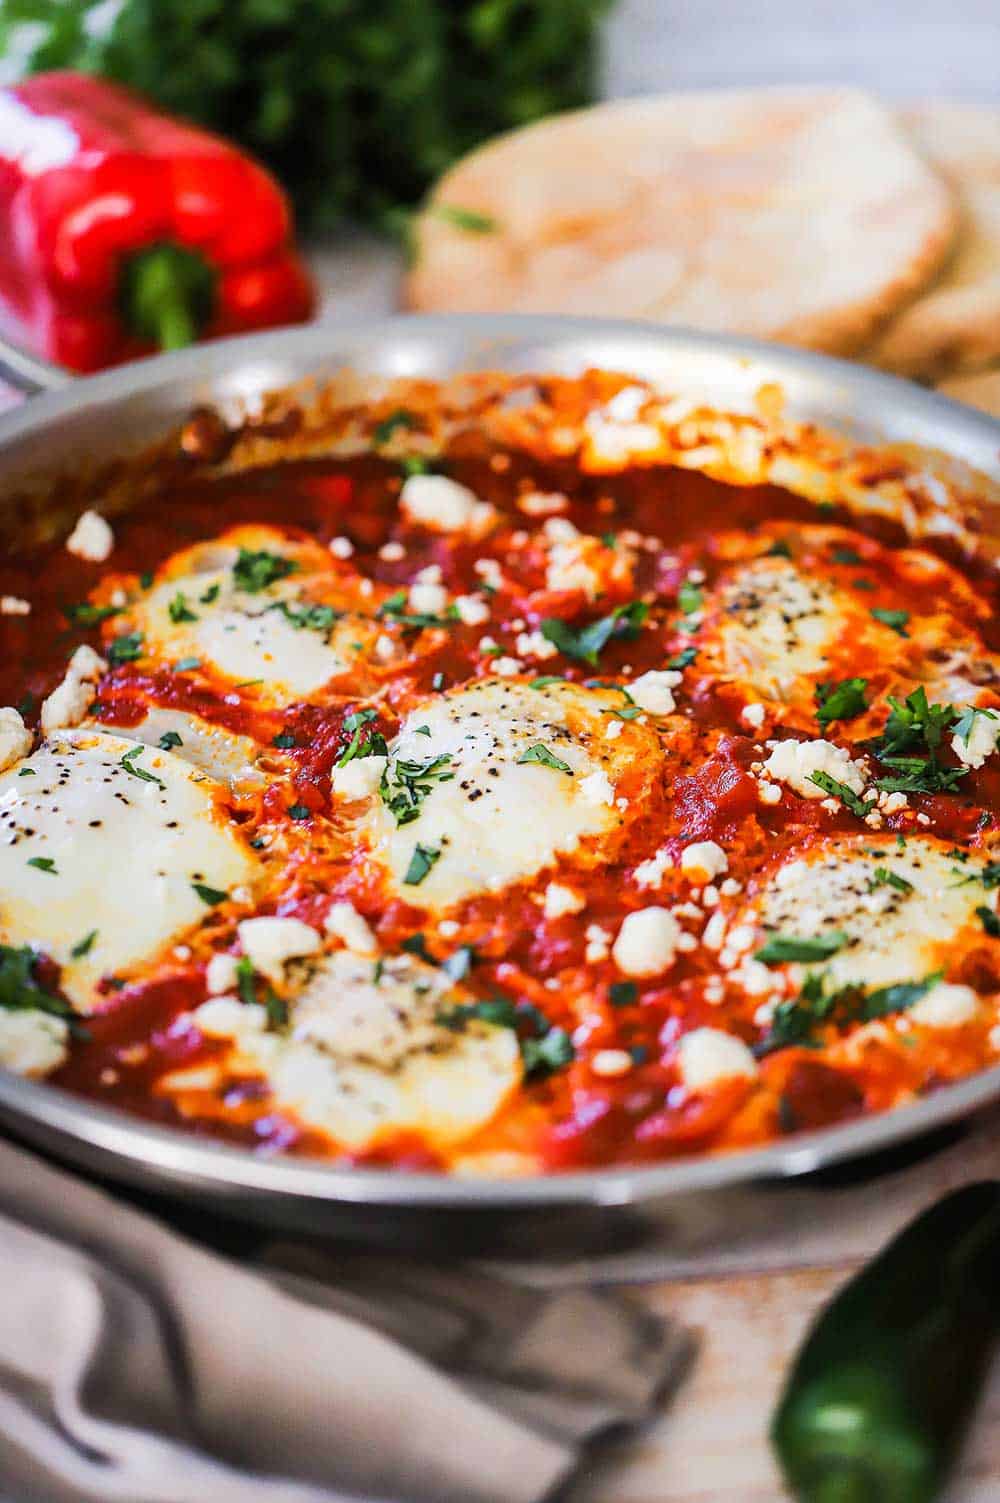 A large stainless steel skillet filled with shakshuka and a red bell pepper and pita bread sitting nearby.